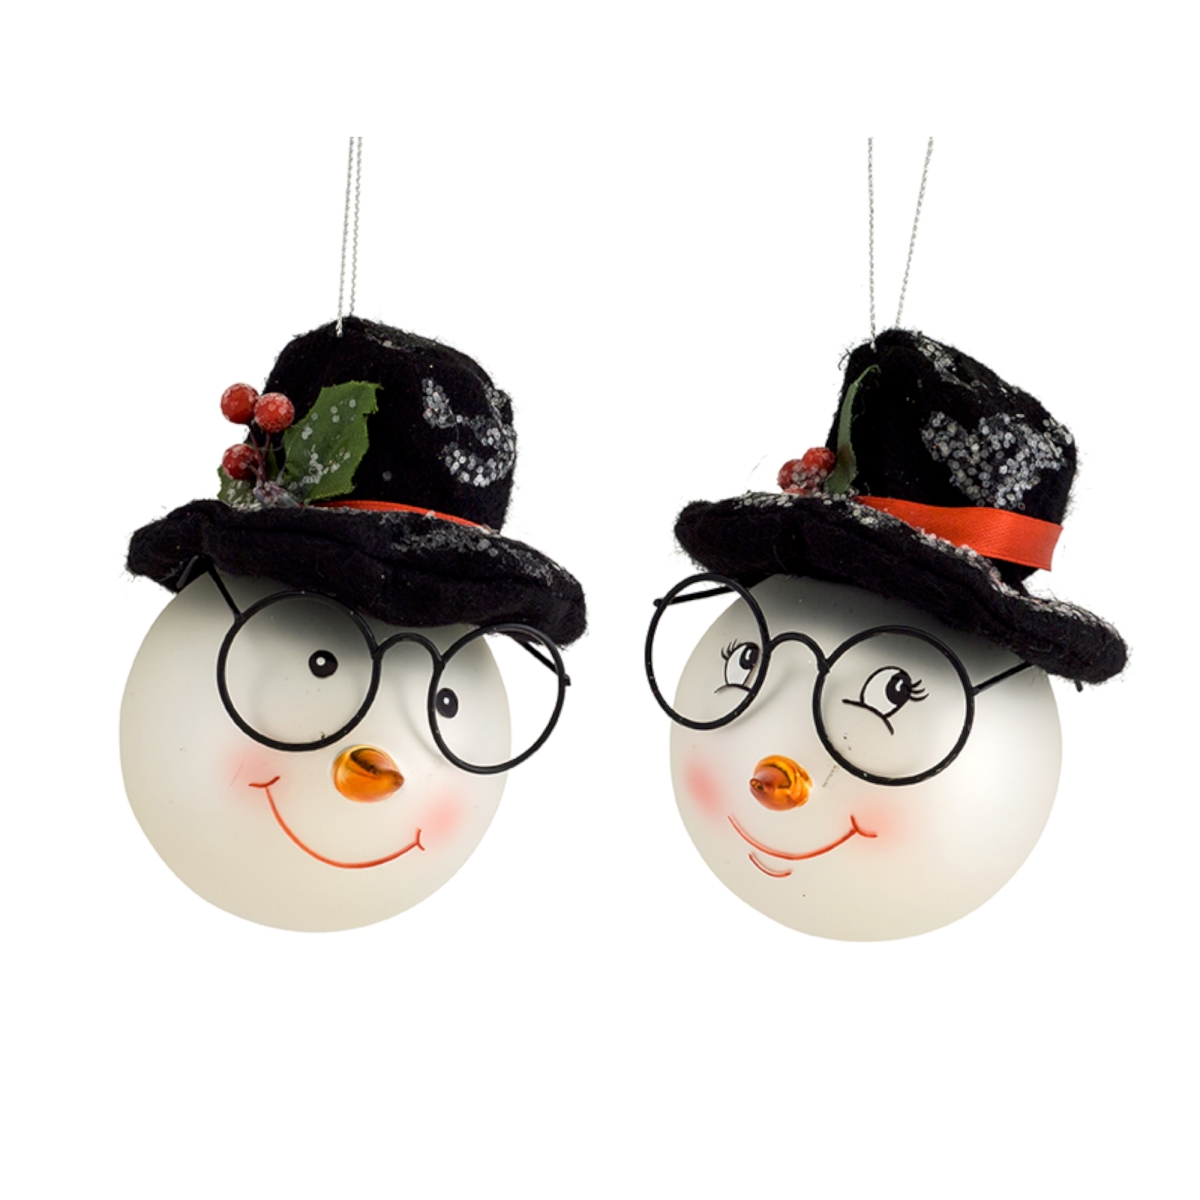 72044ds 6 X 3.75 In. Glass Snowman Head With Hat, Black & Red - Set Of 6